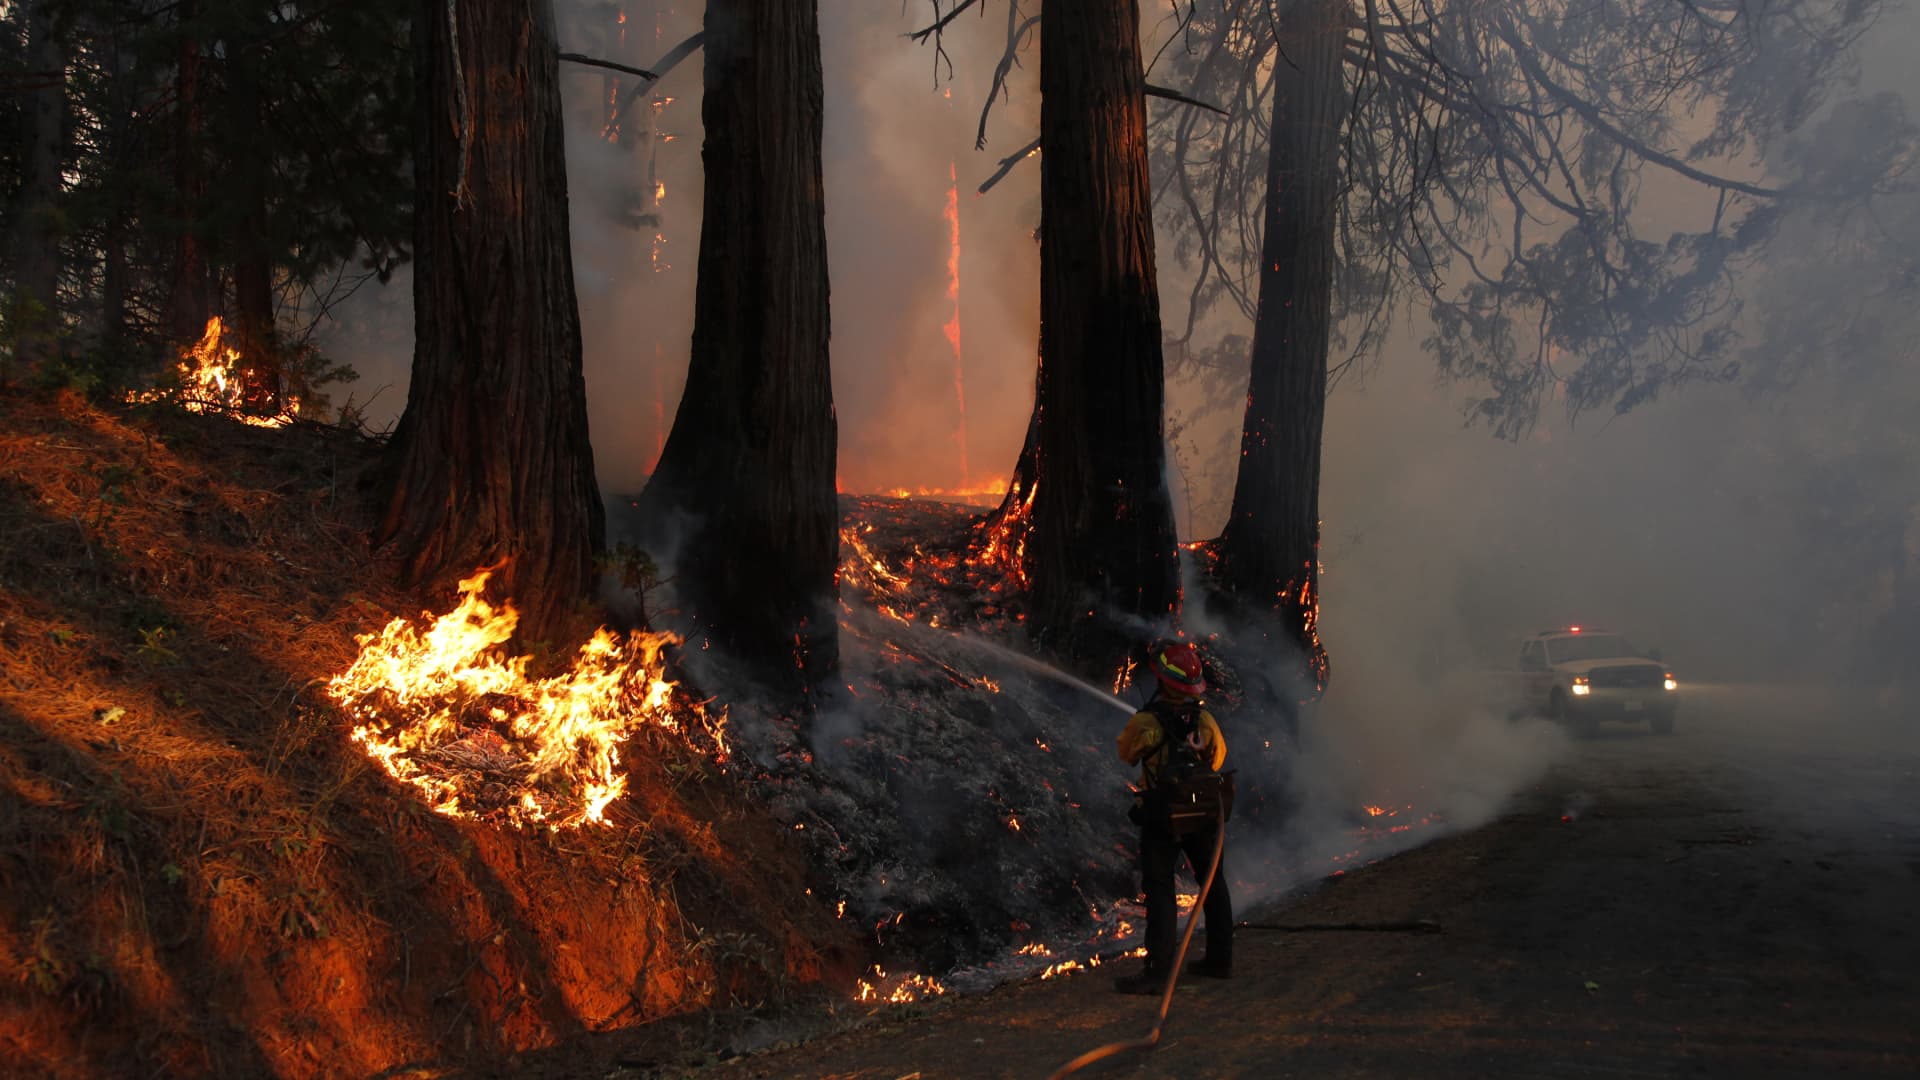 A firefighter battles flames during the Mosquito Fire near Michigan Bluff, California, US, on Wednesday, Sept. 7, 2022.